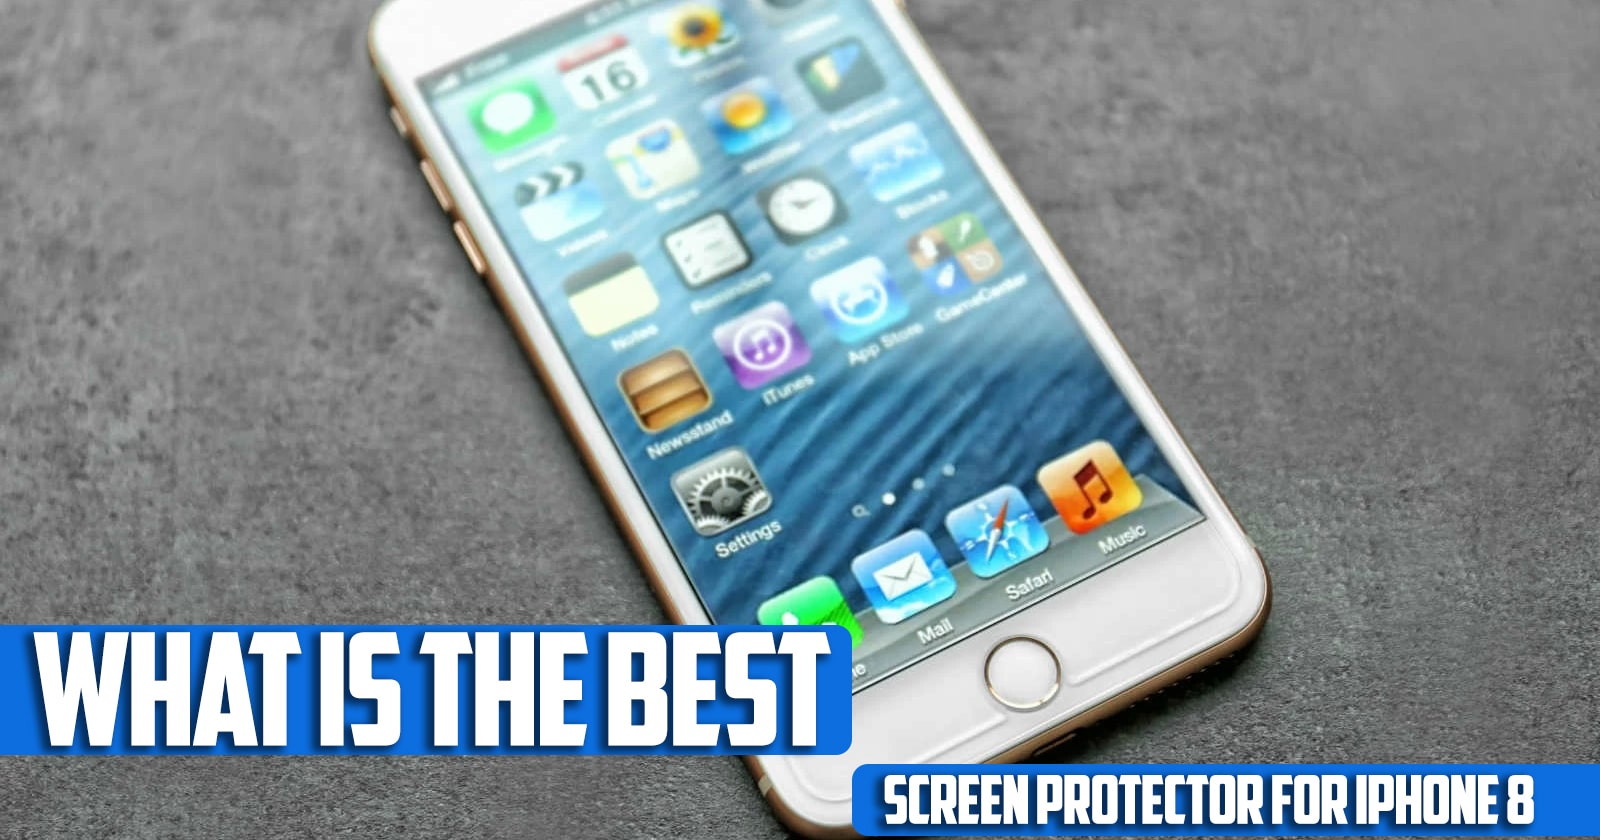 What Is the Best Screen Protector for iPhone 8